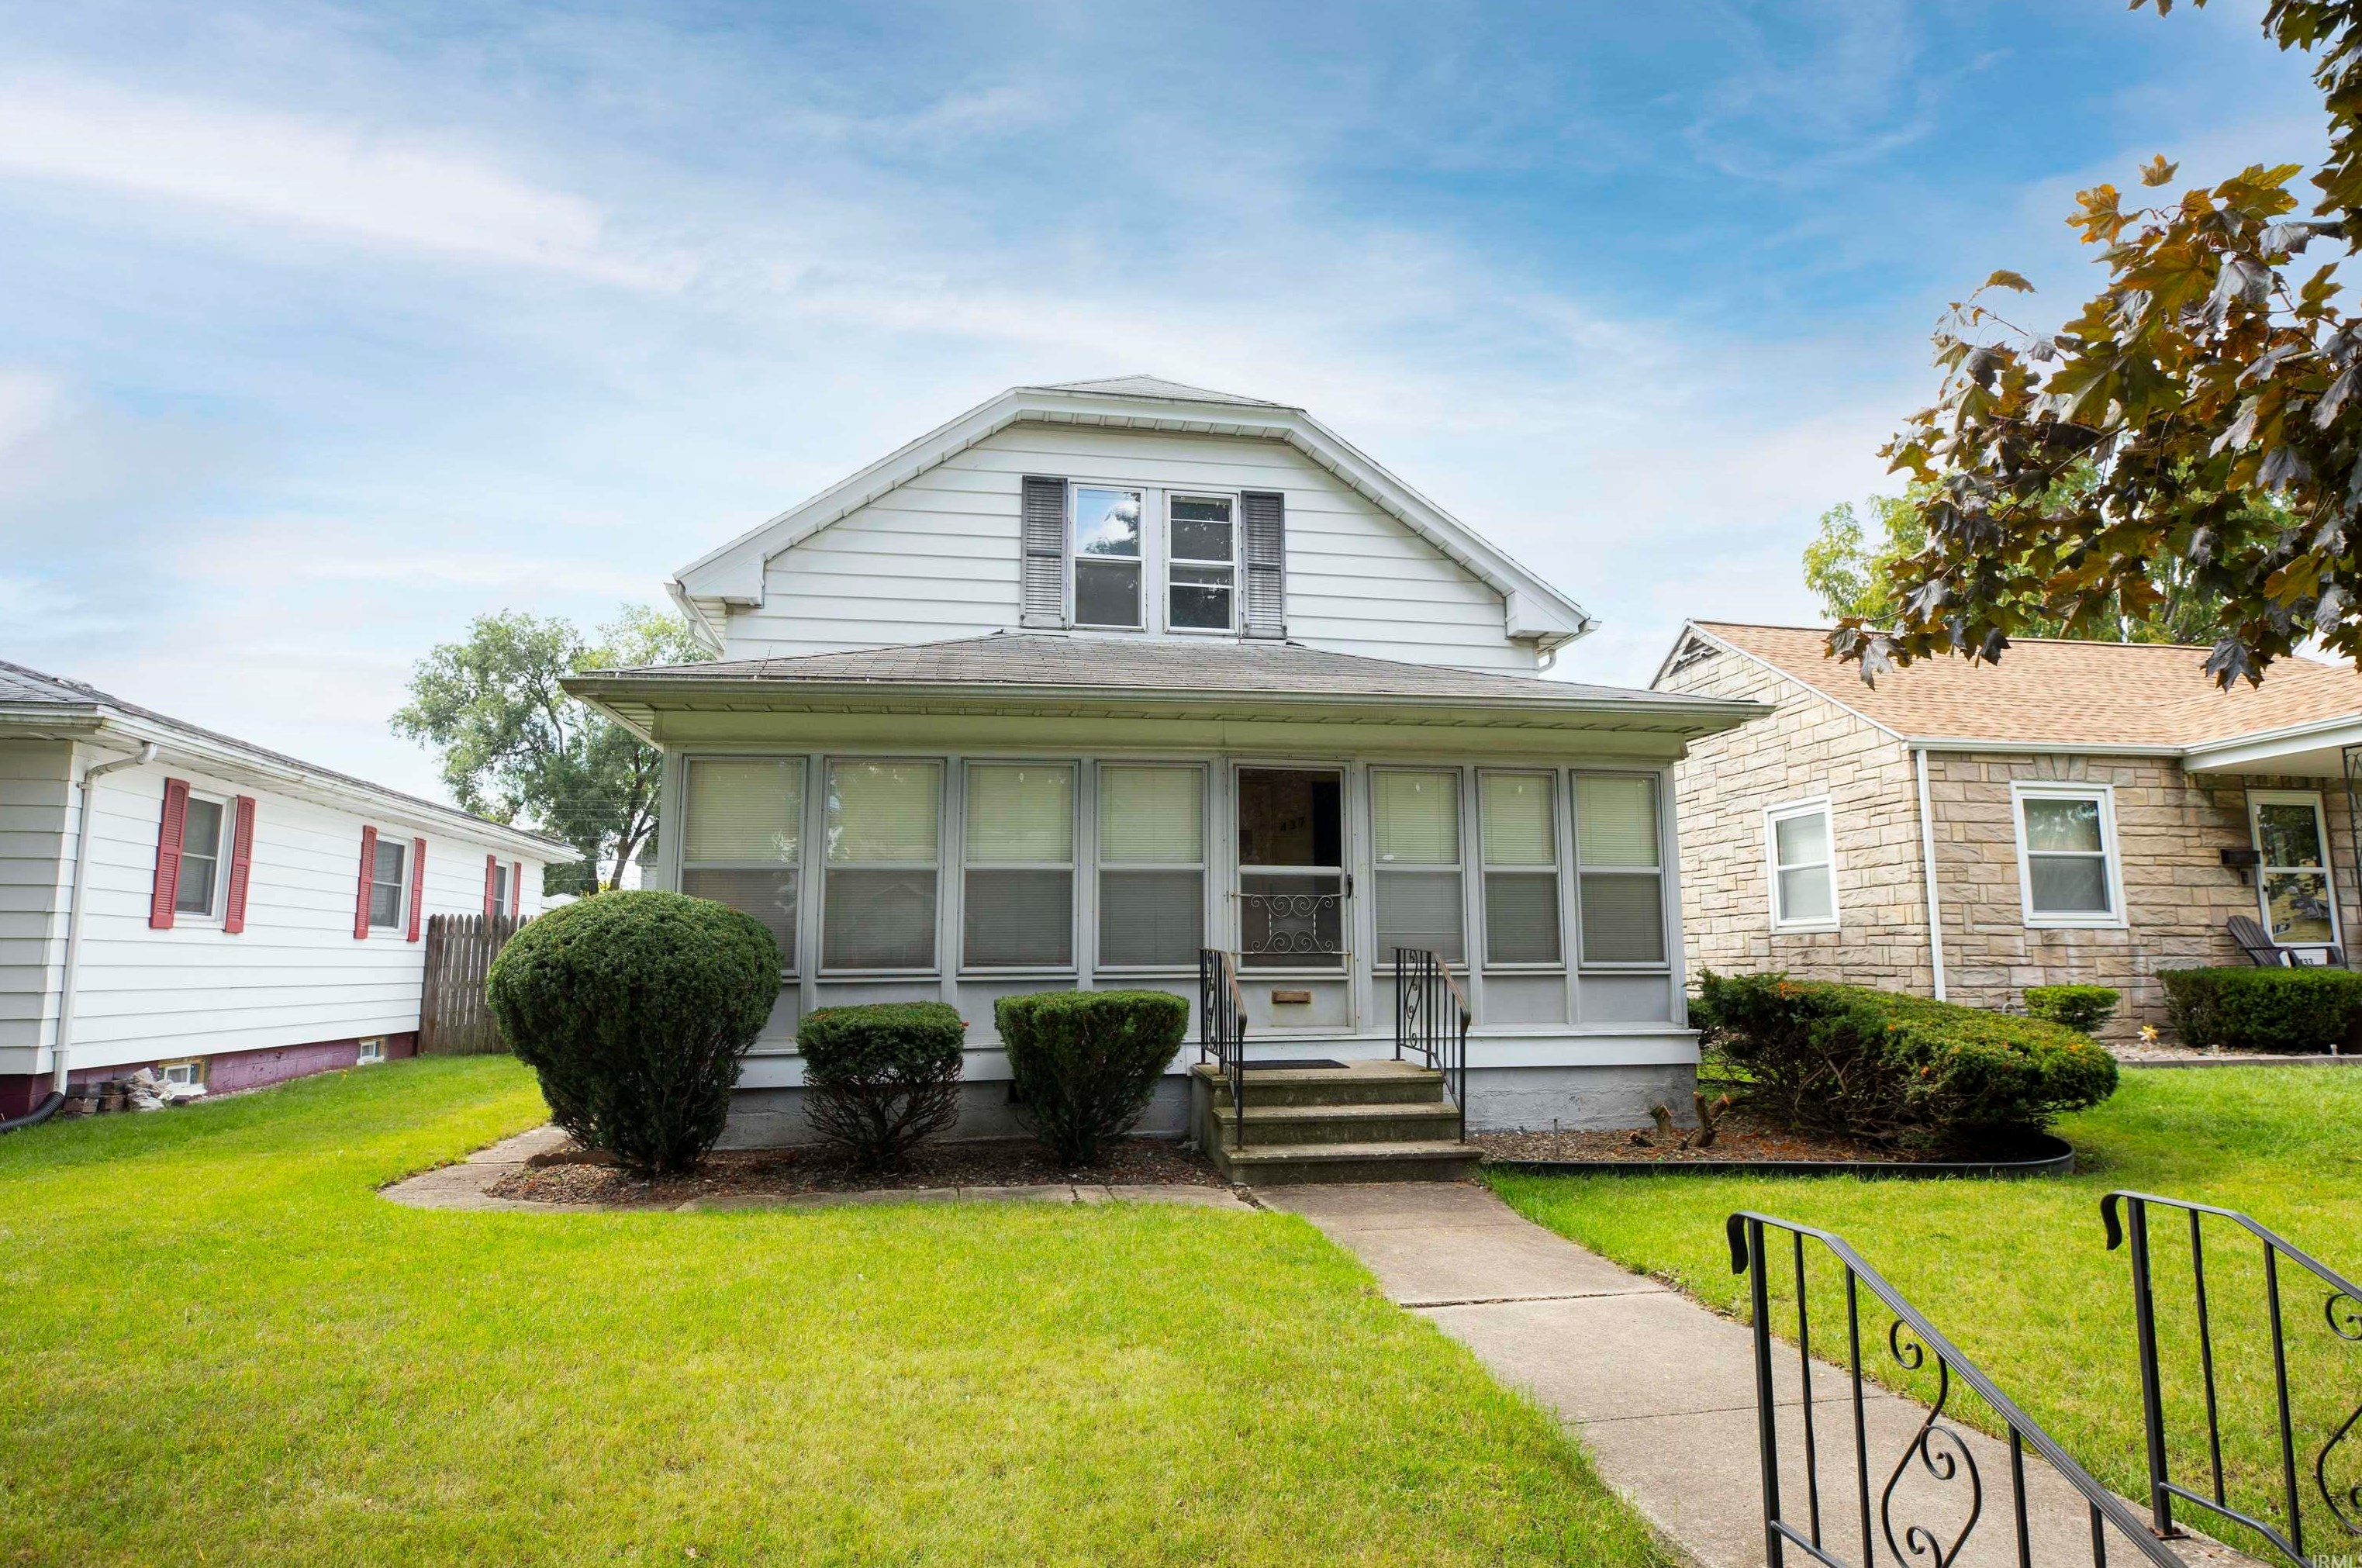 437 S Edison Ave, South Bend, IN 46619